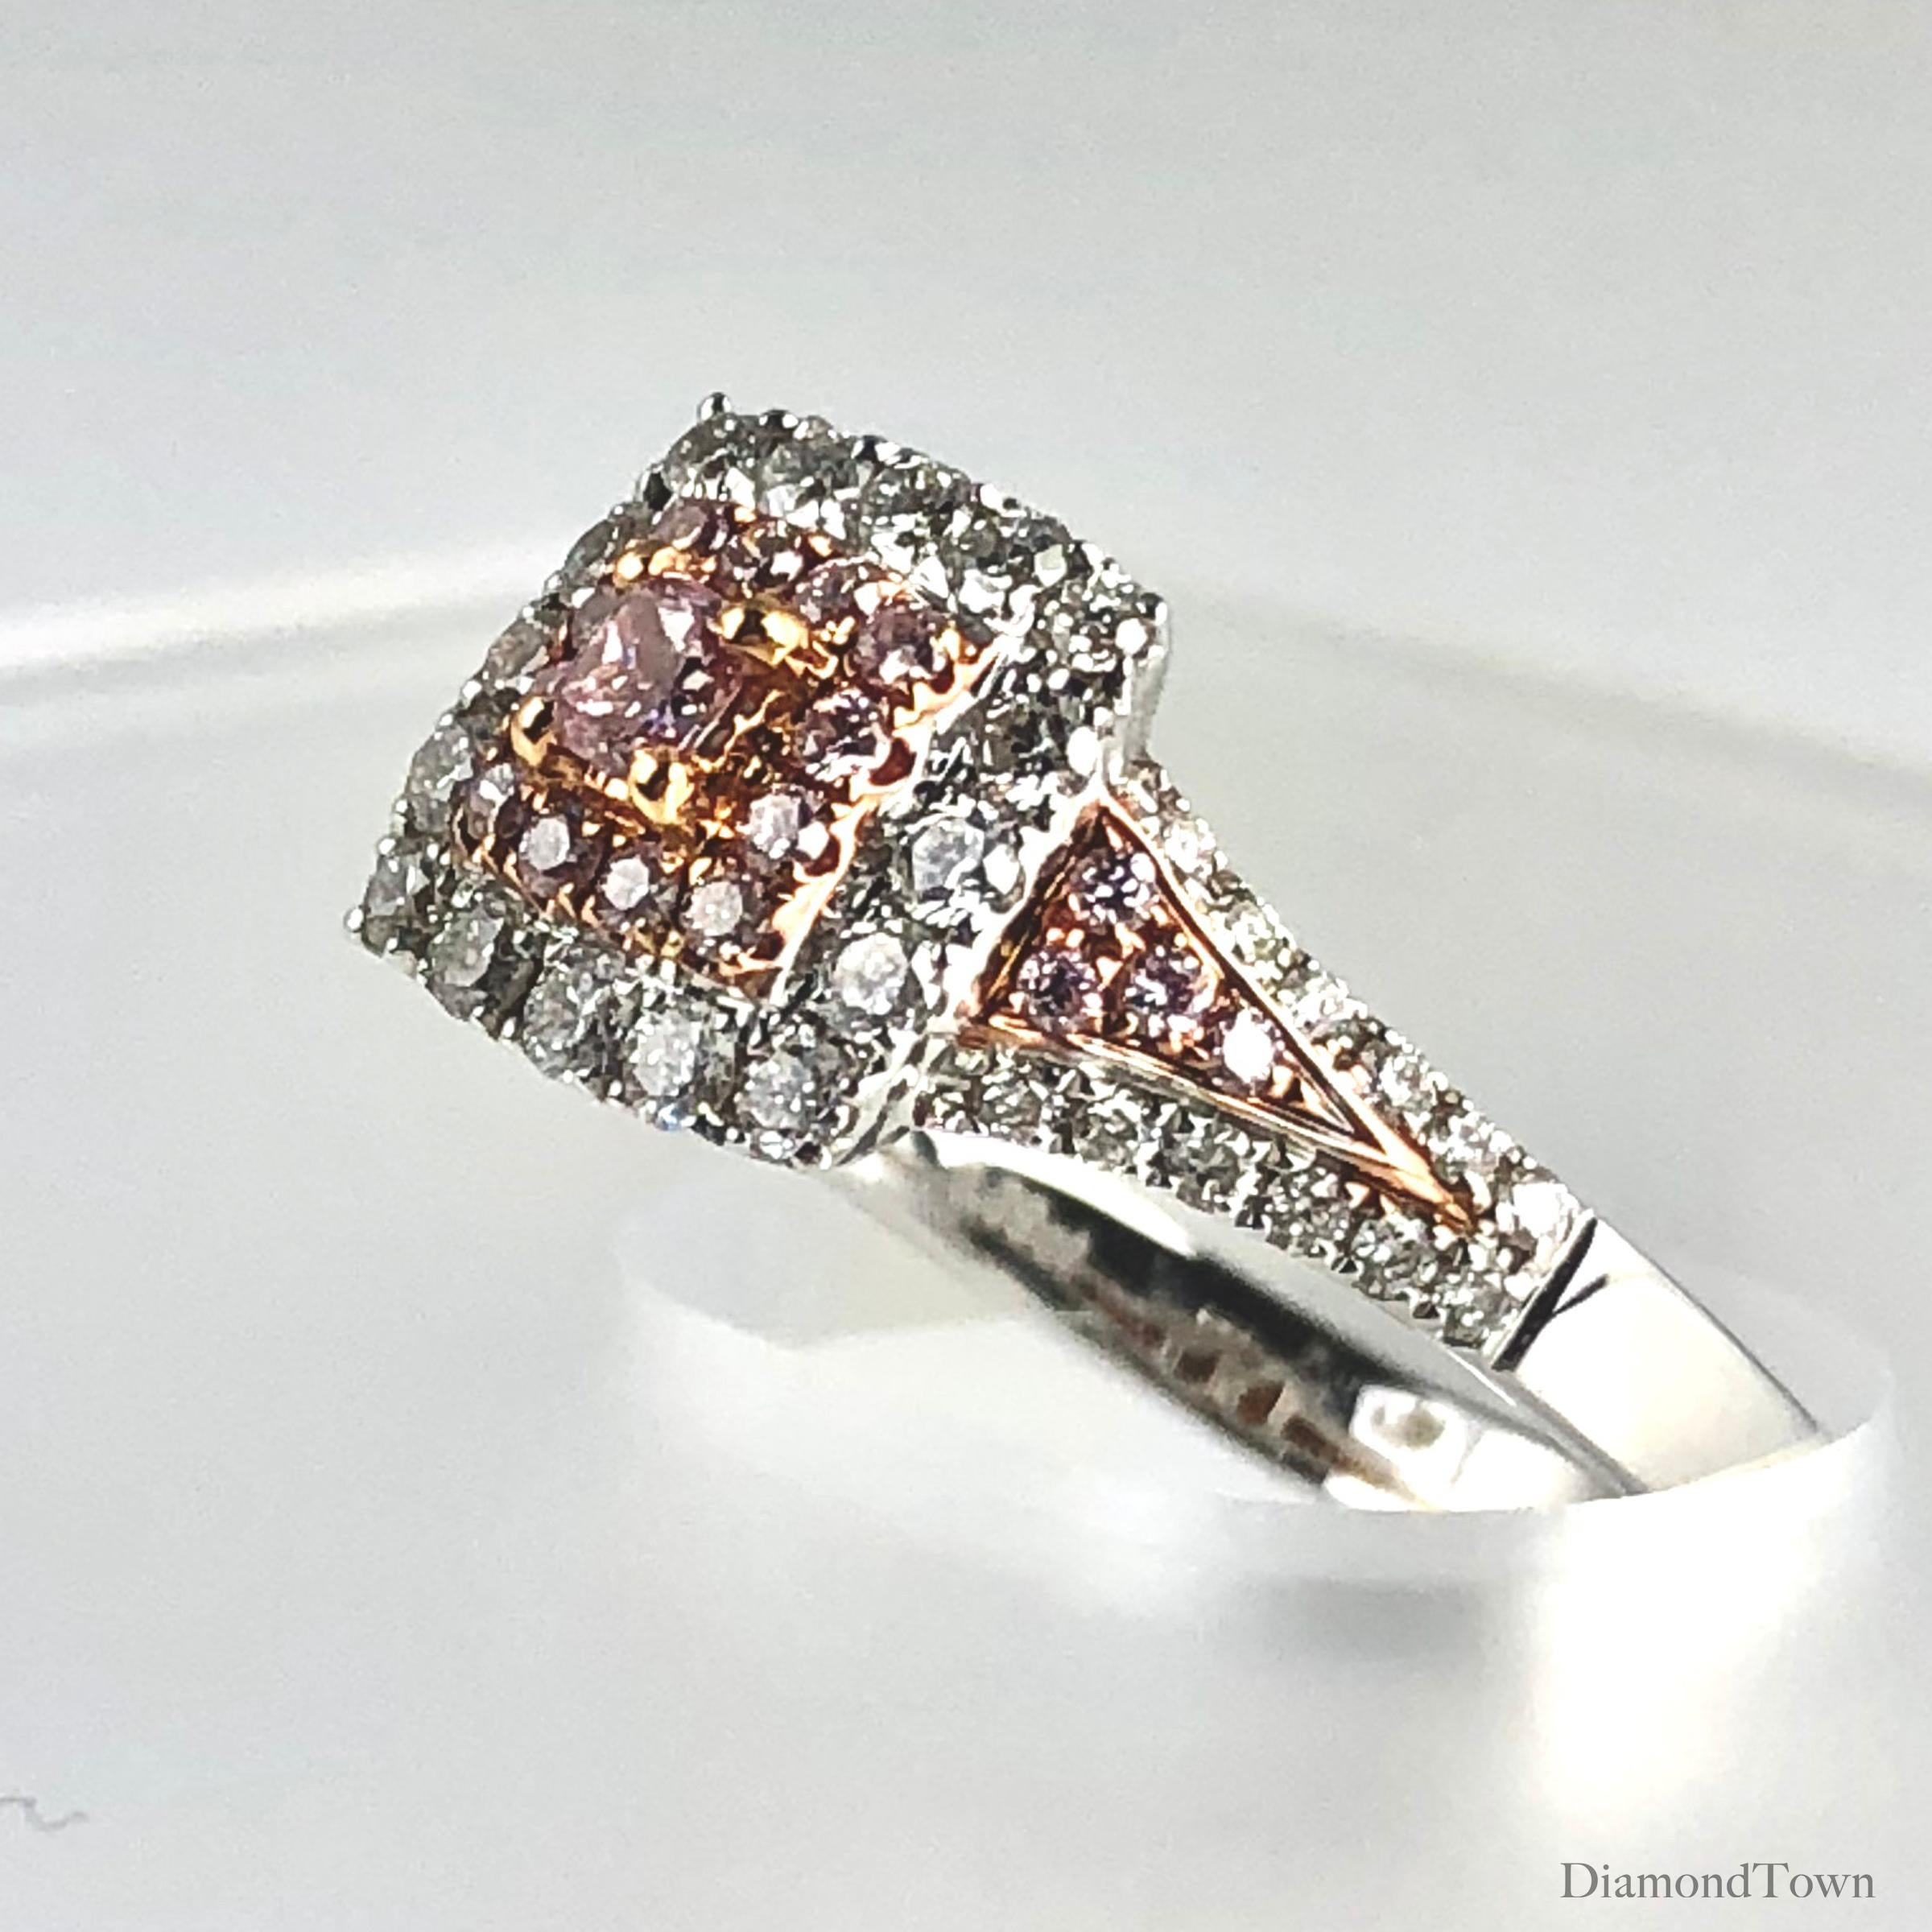 (DiamondTown) This gorgeous halo ring features a 0.09 carat Natural Pink Diamond center, surrounded by a square double halo of round pink and round white diamonds. The total diamond weight is 0.64 carats.

This ring can be professionally sized to